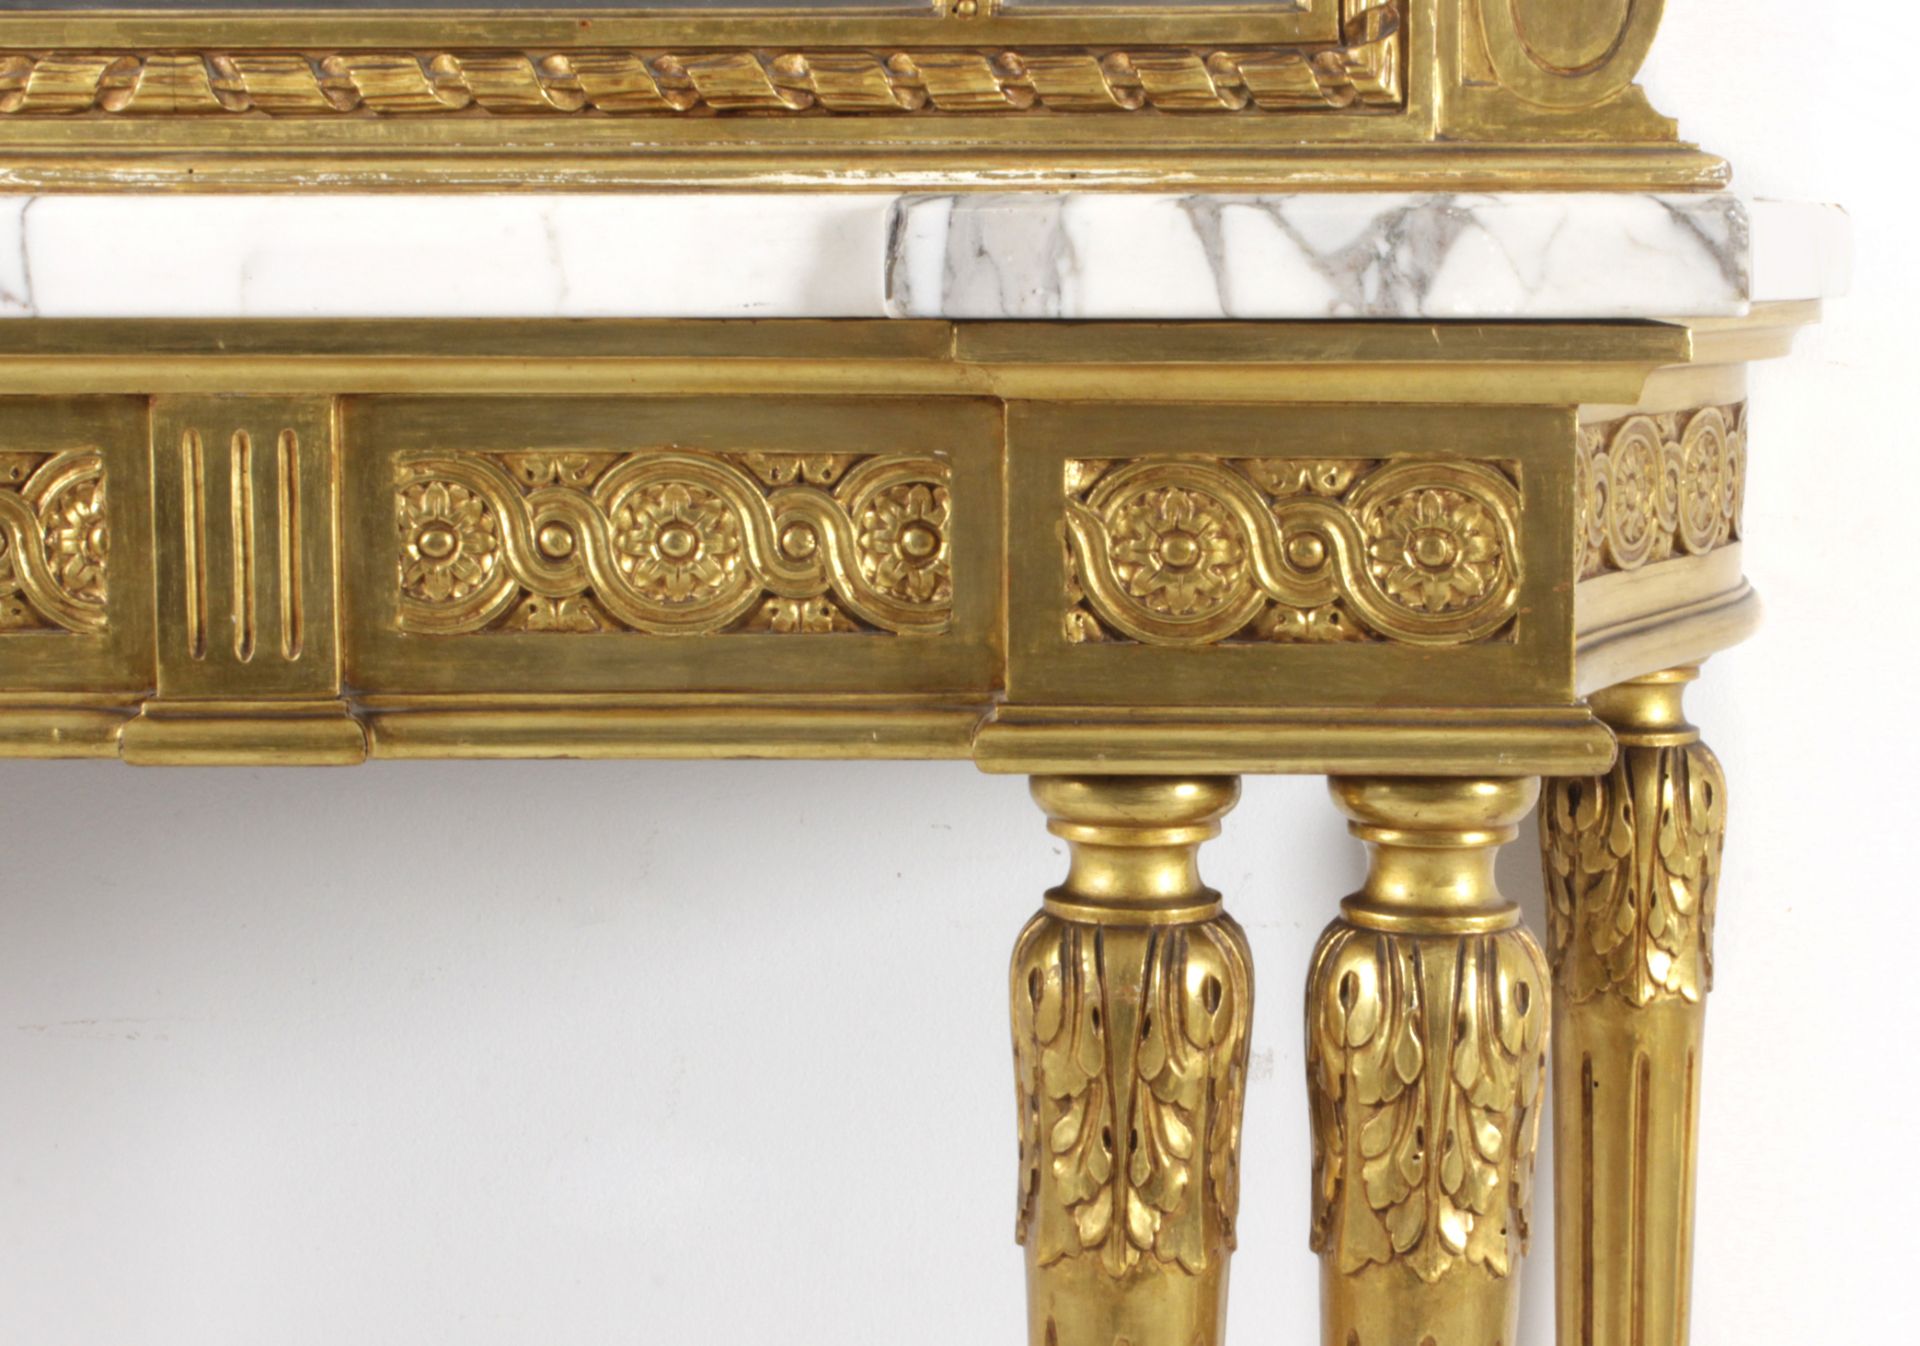 A 20th century Louis XVI style console table and mirror - Image 3 of 3